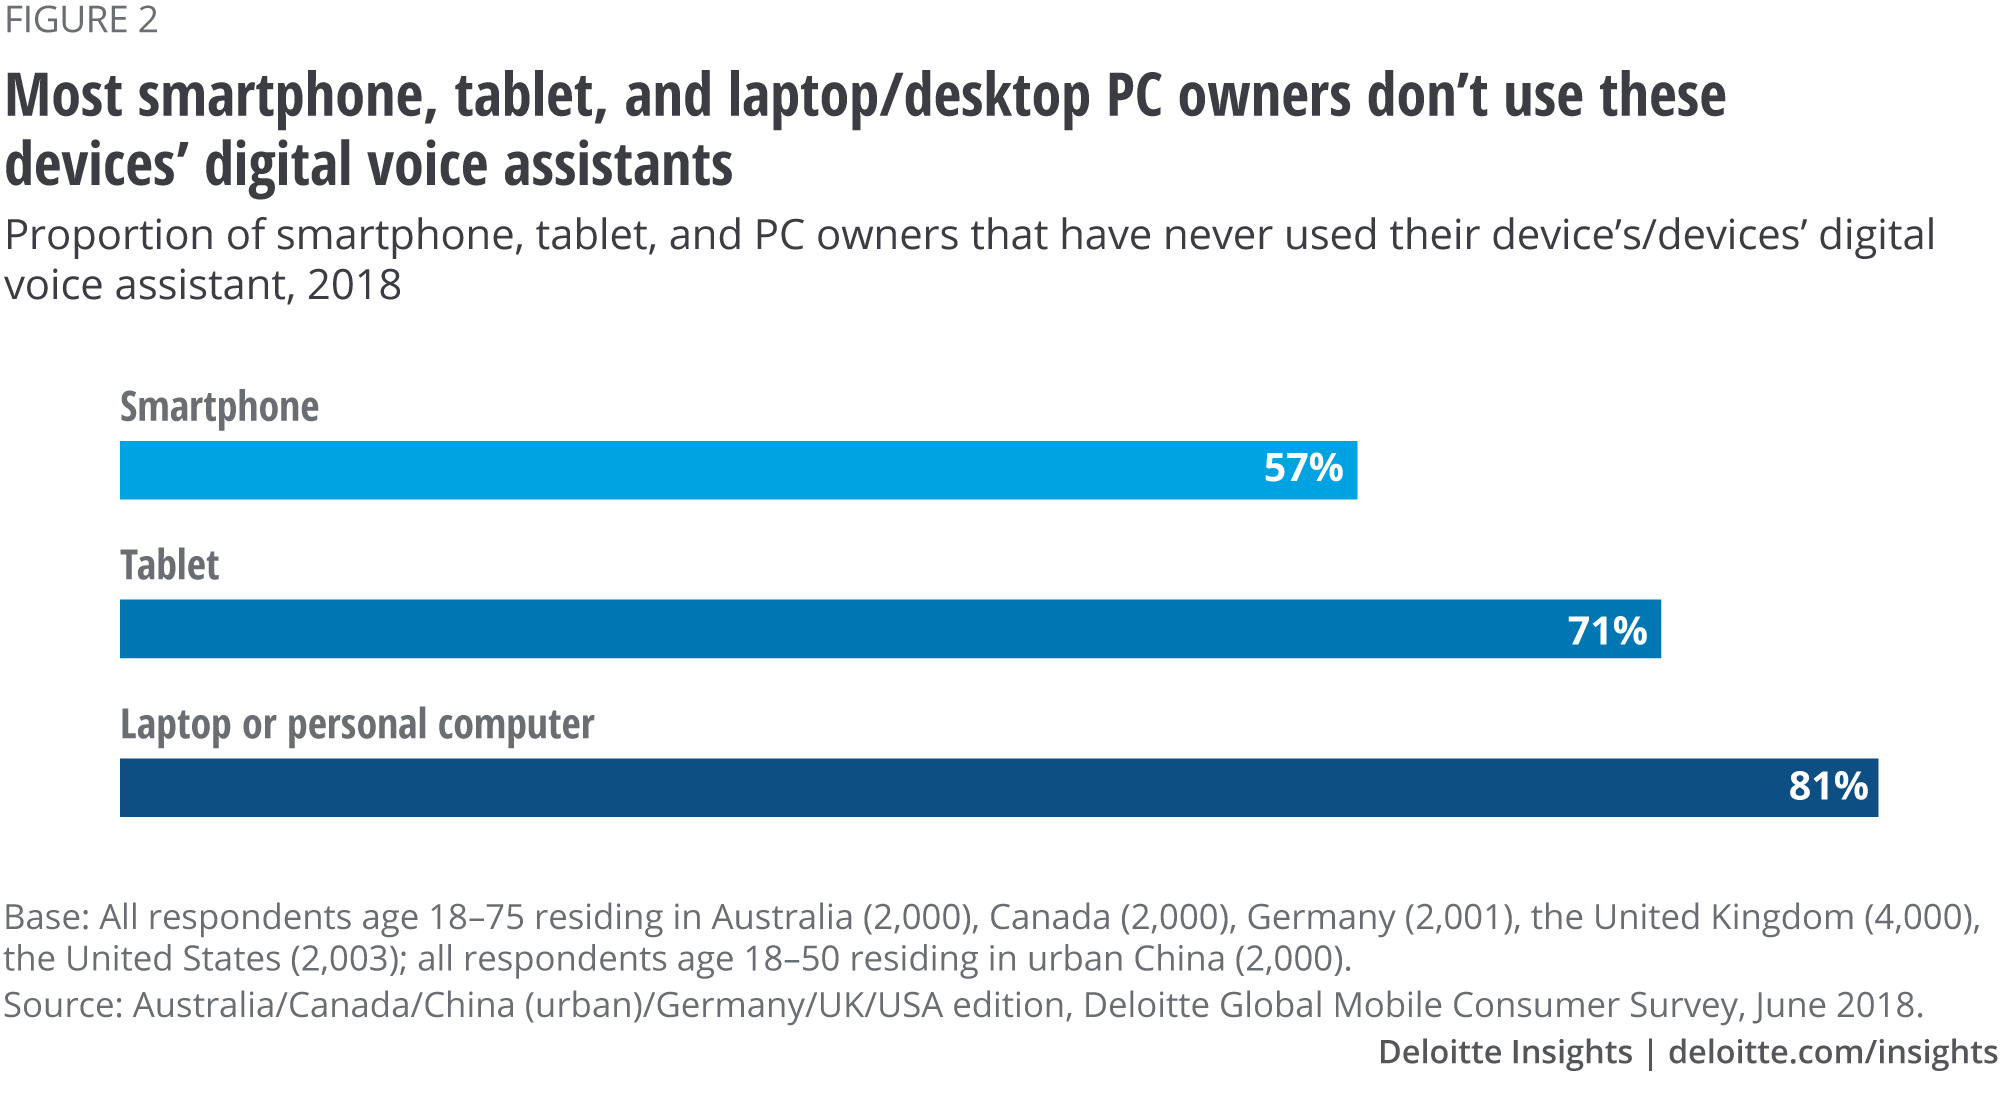 Most smartphone, tablet, and laptop/desktop PC owners don’t use these devices’ digital voice assistants